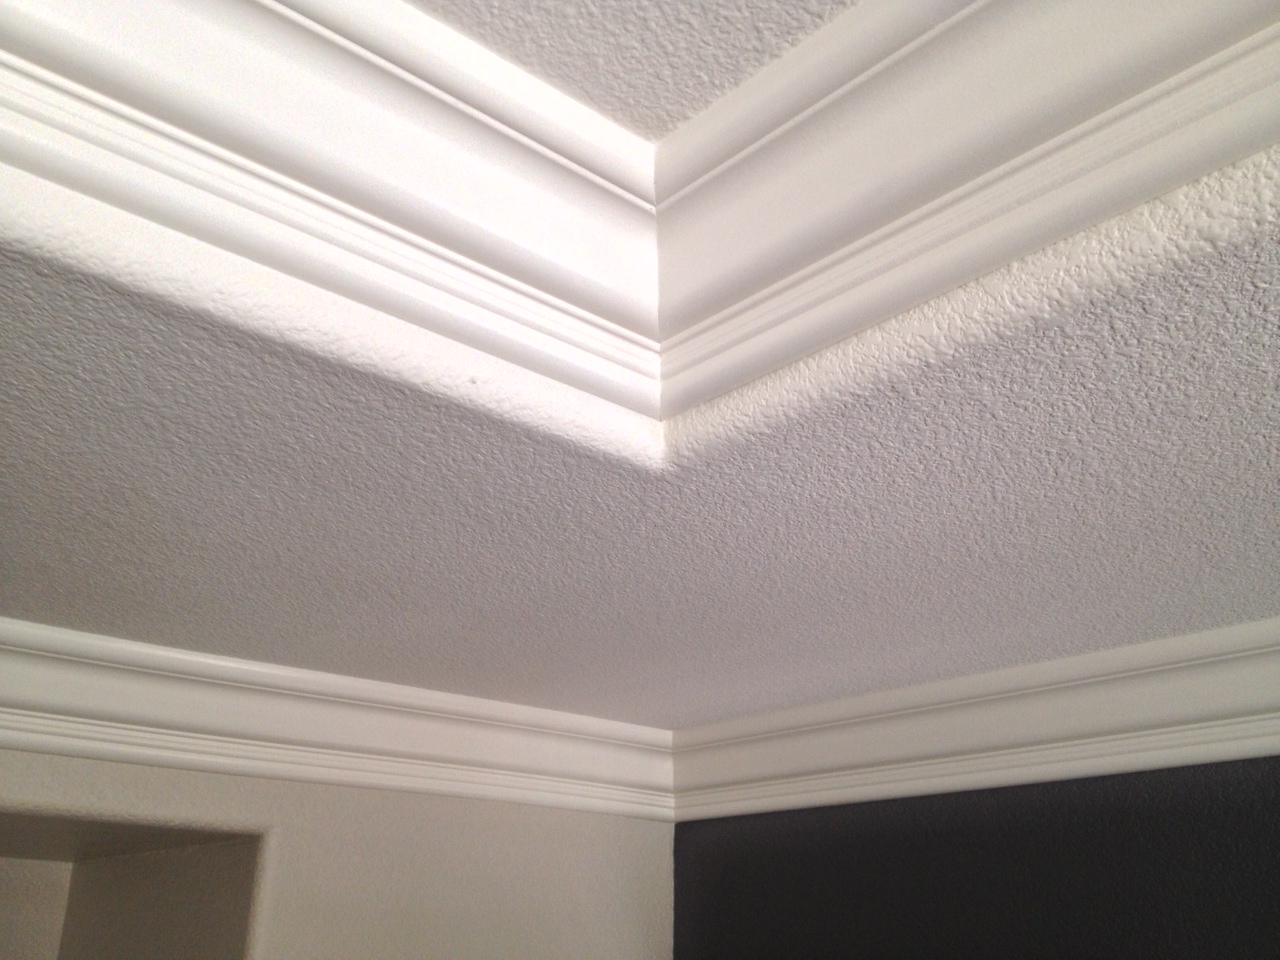 Crown Molding Installer In Temecula Who Should I Choose